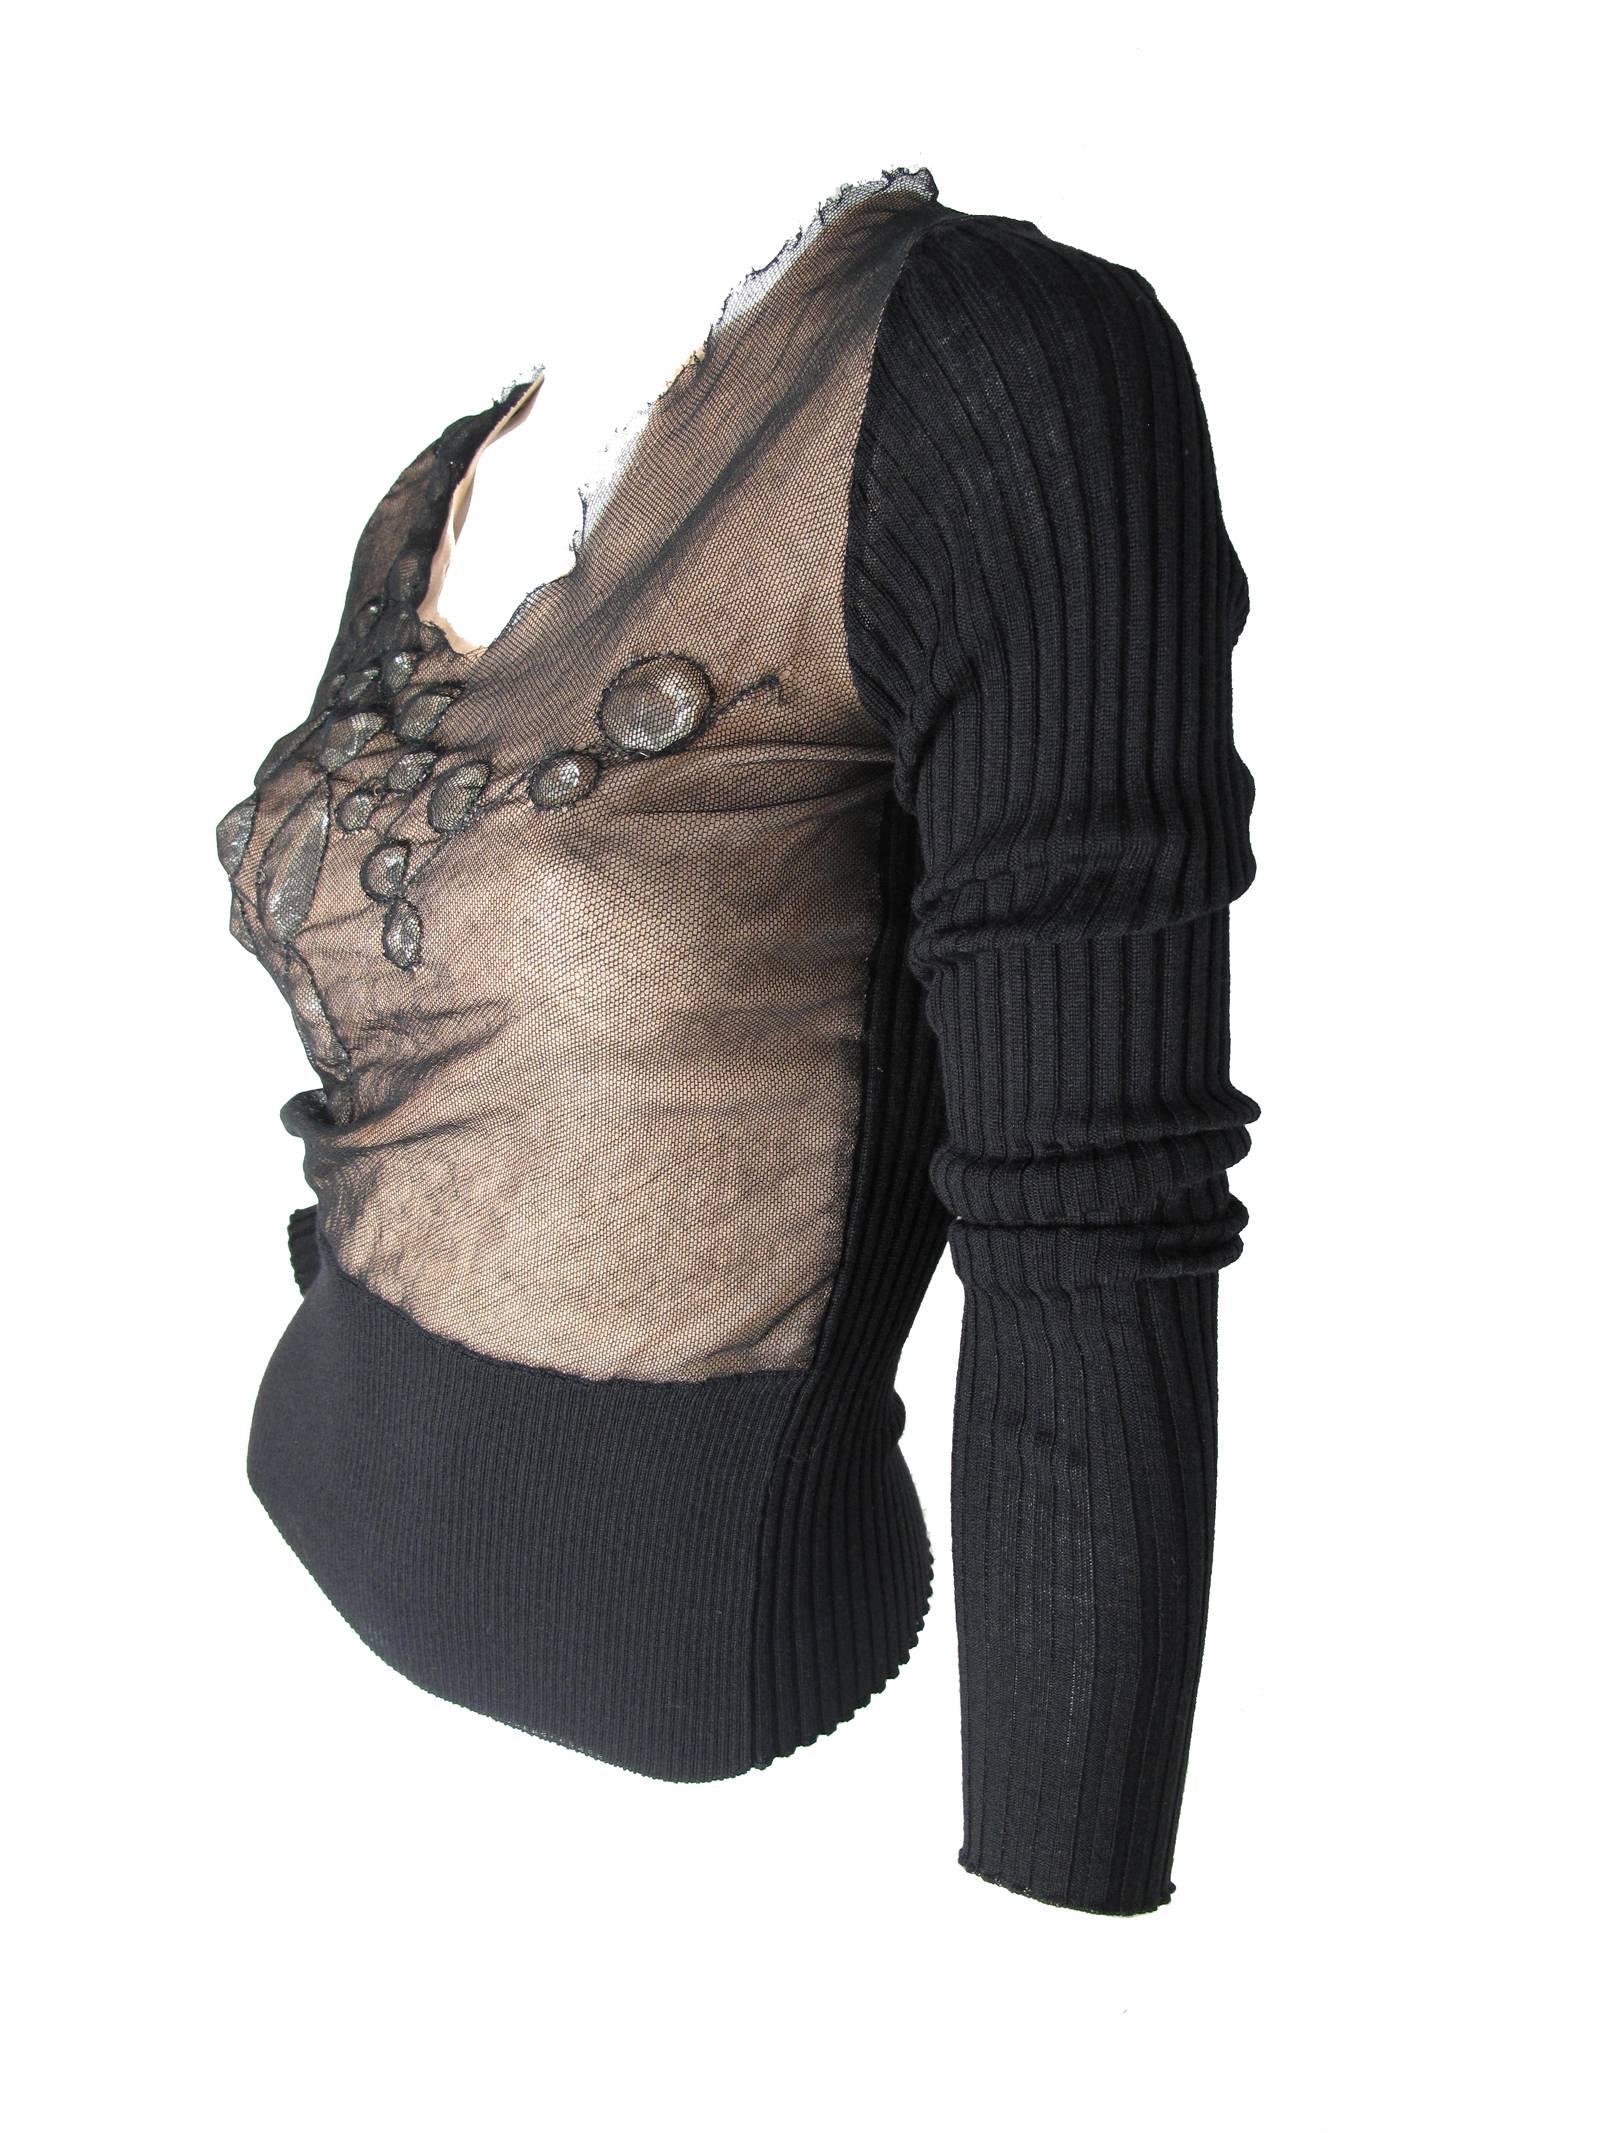 Black Jean Paul Gaultier Sweater Crystals and Mesh